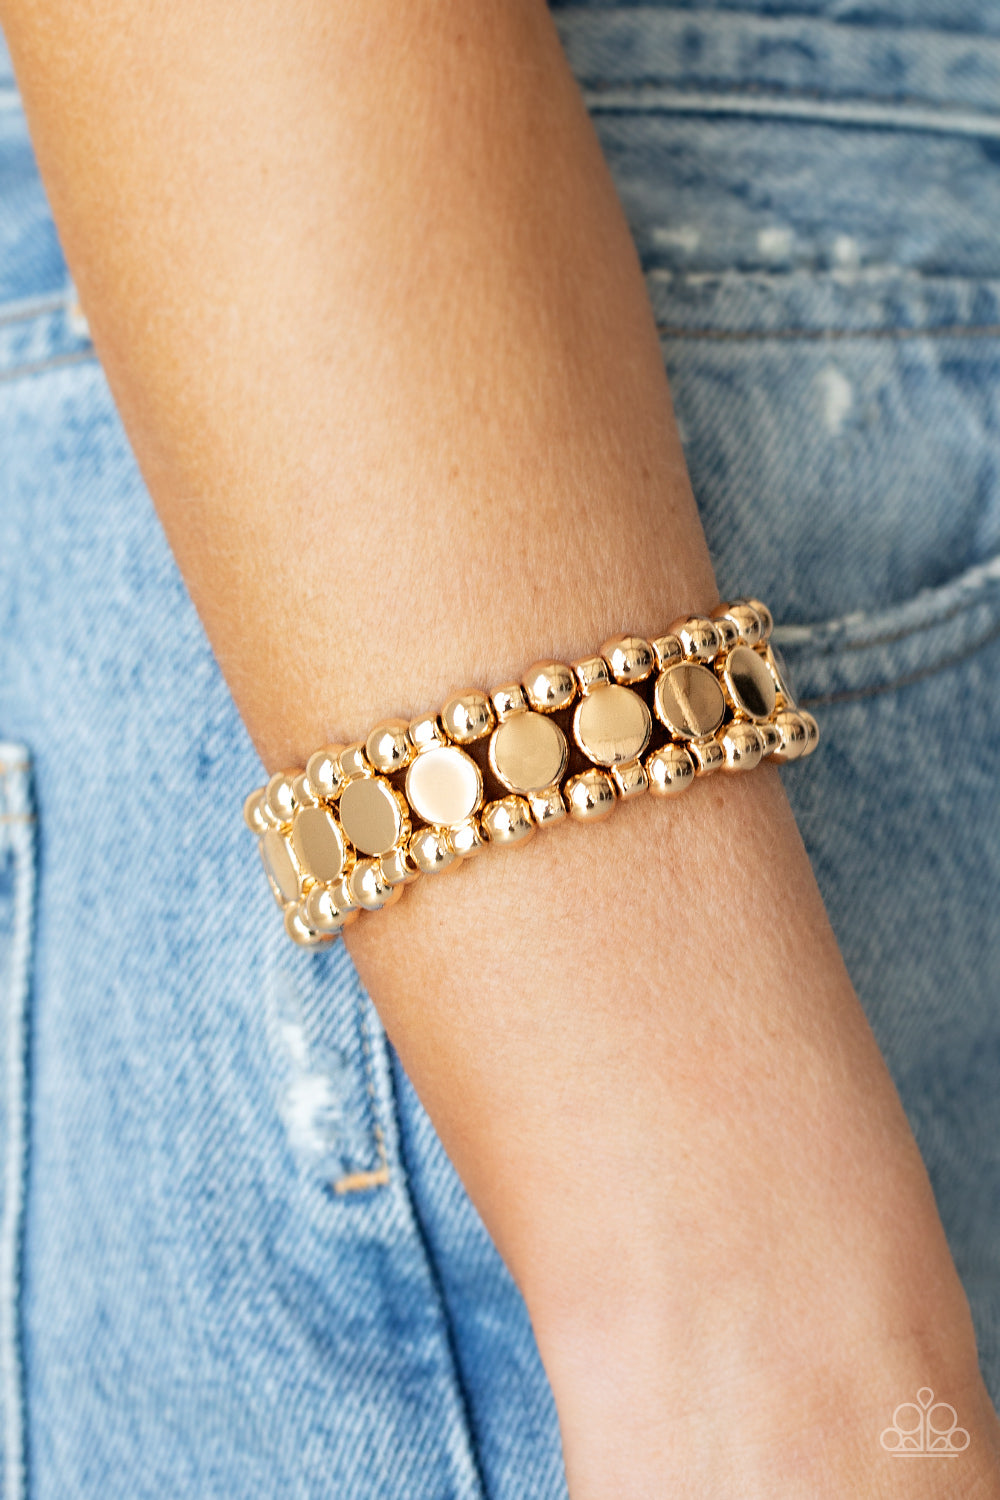 Metro Magnetism Gold Bracelet - Paparazzi Accessories  Glistening gold disc fittings and pairs of classic gold beads are threaded along stretchy bands around the wrist that connect into a bold industrial display around the wrist.  All Paparazzi Accessories are lead free and nickel free!  Sold as one individual bracelet.